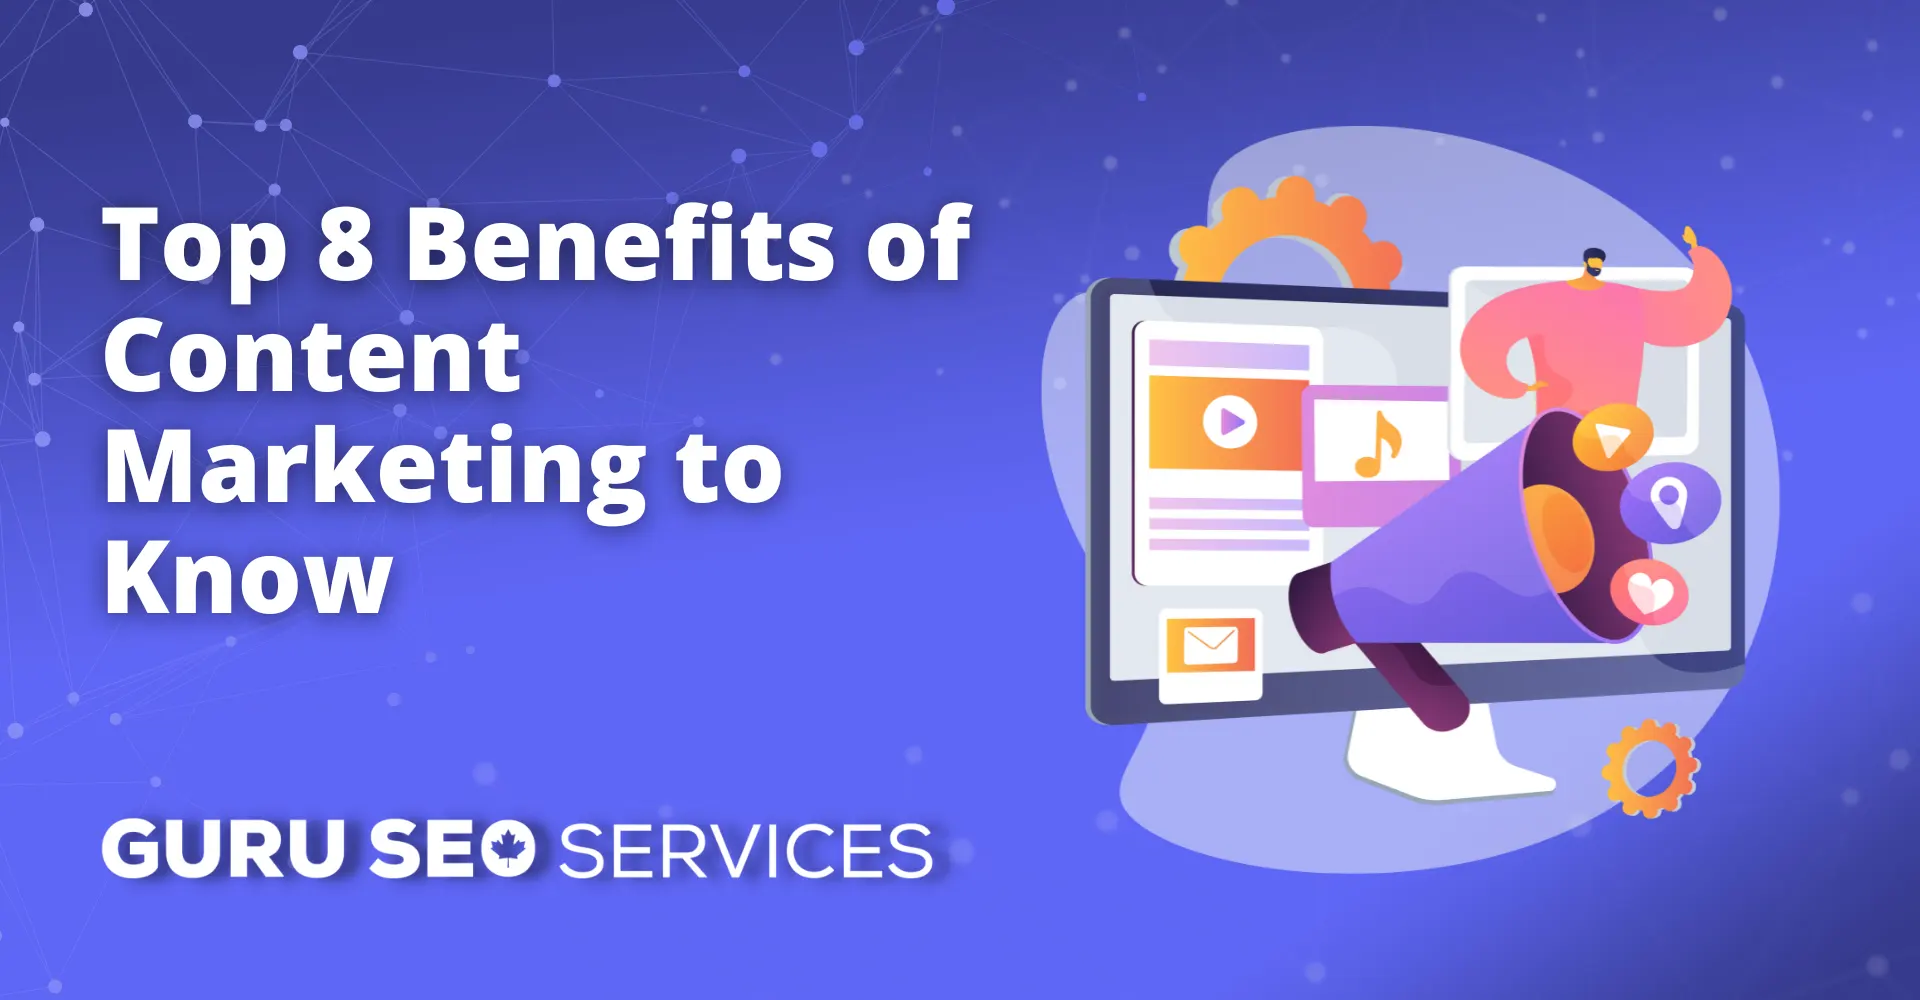 Discover the top 8 benefits of content marketing that are crucial for business growth.